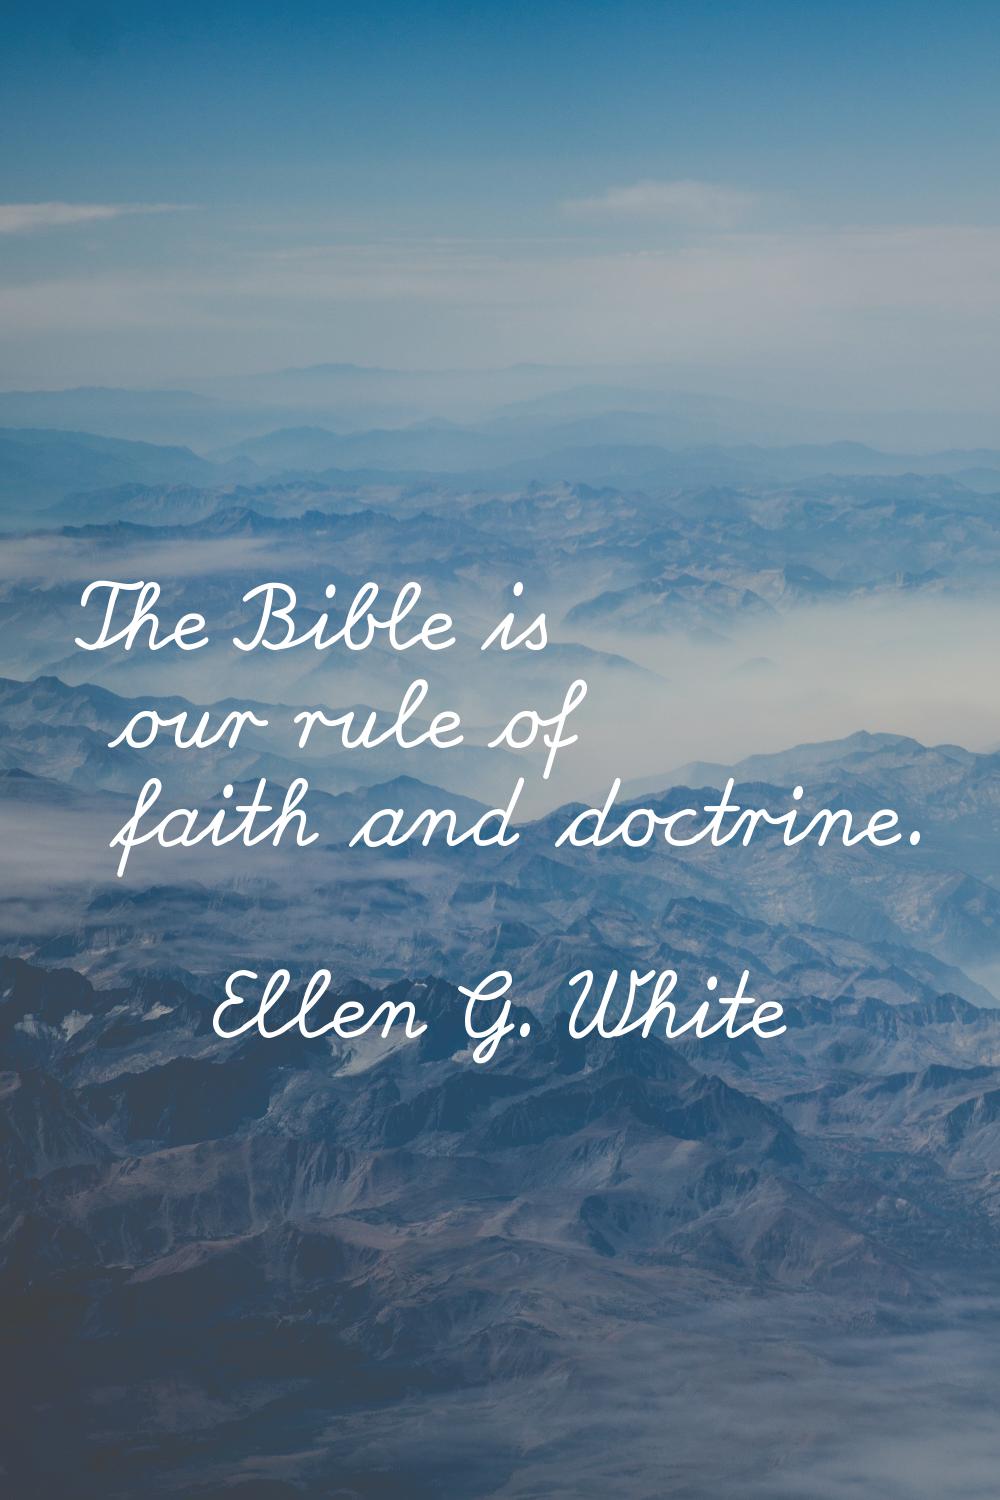 The Bible is our rule of faith and doctrine.